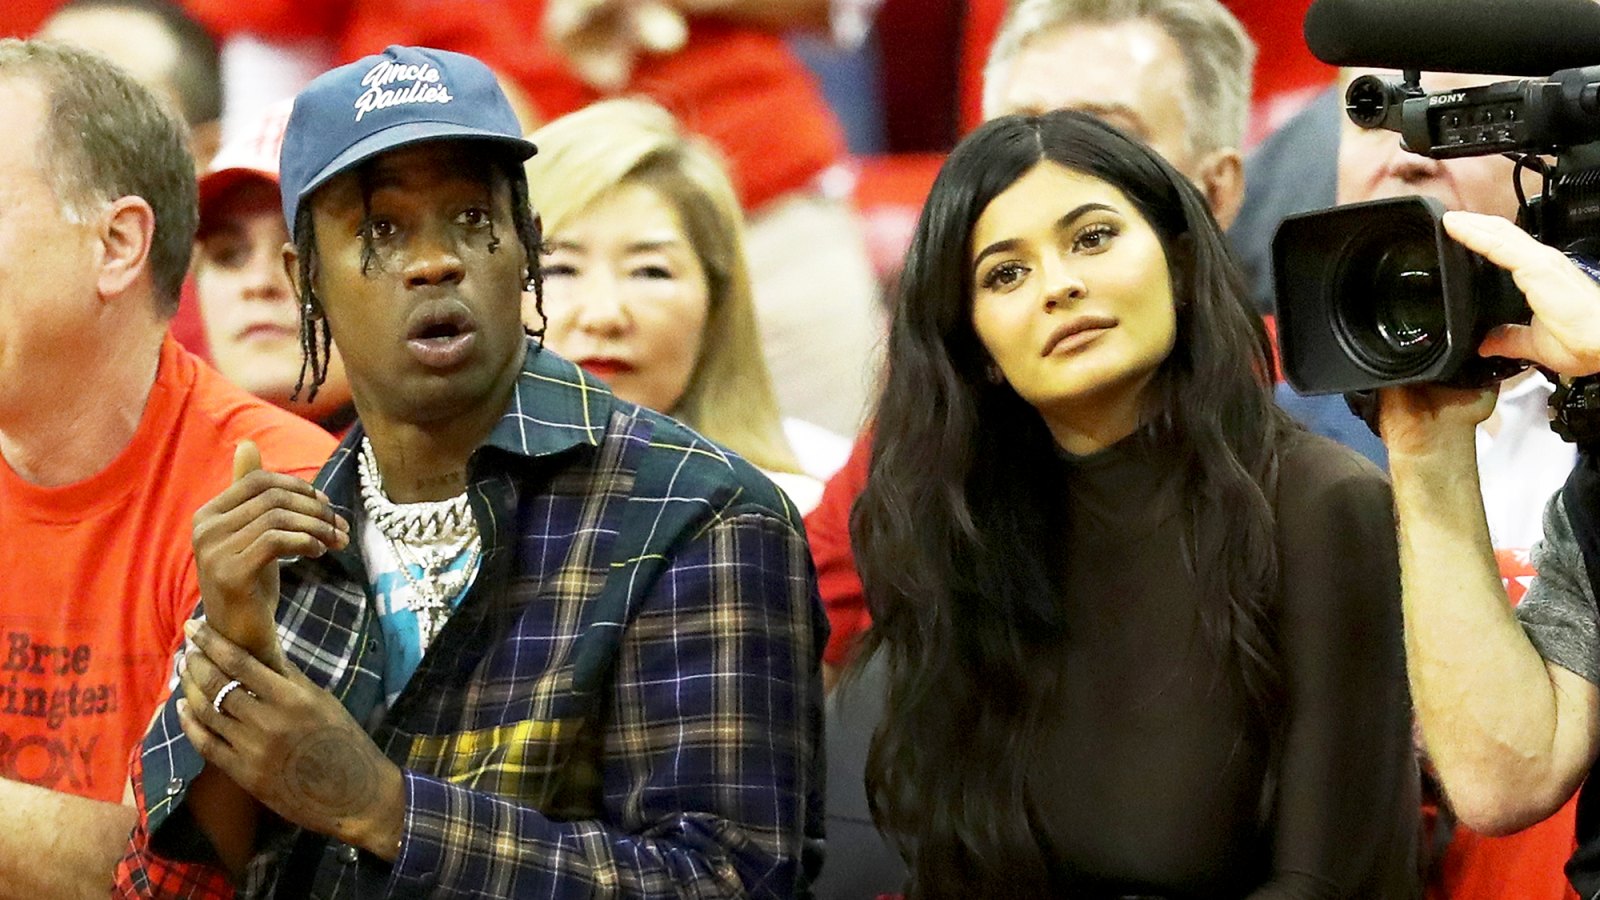 Travis Scott and Kylie Jenner attend Game Seven of the Western Conference Finals of the 2018 NBA Playoffs between the Houston Rockets and the Golden State Warriors at Toyota Center on May 28, 2018 in Houston, Texas.